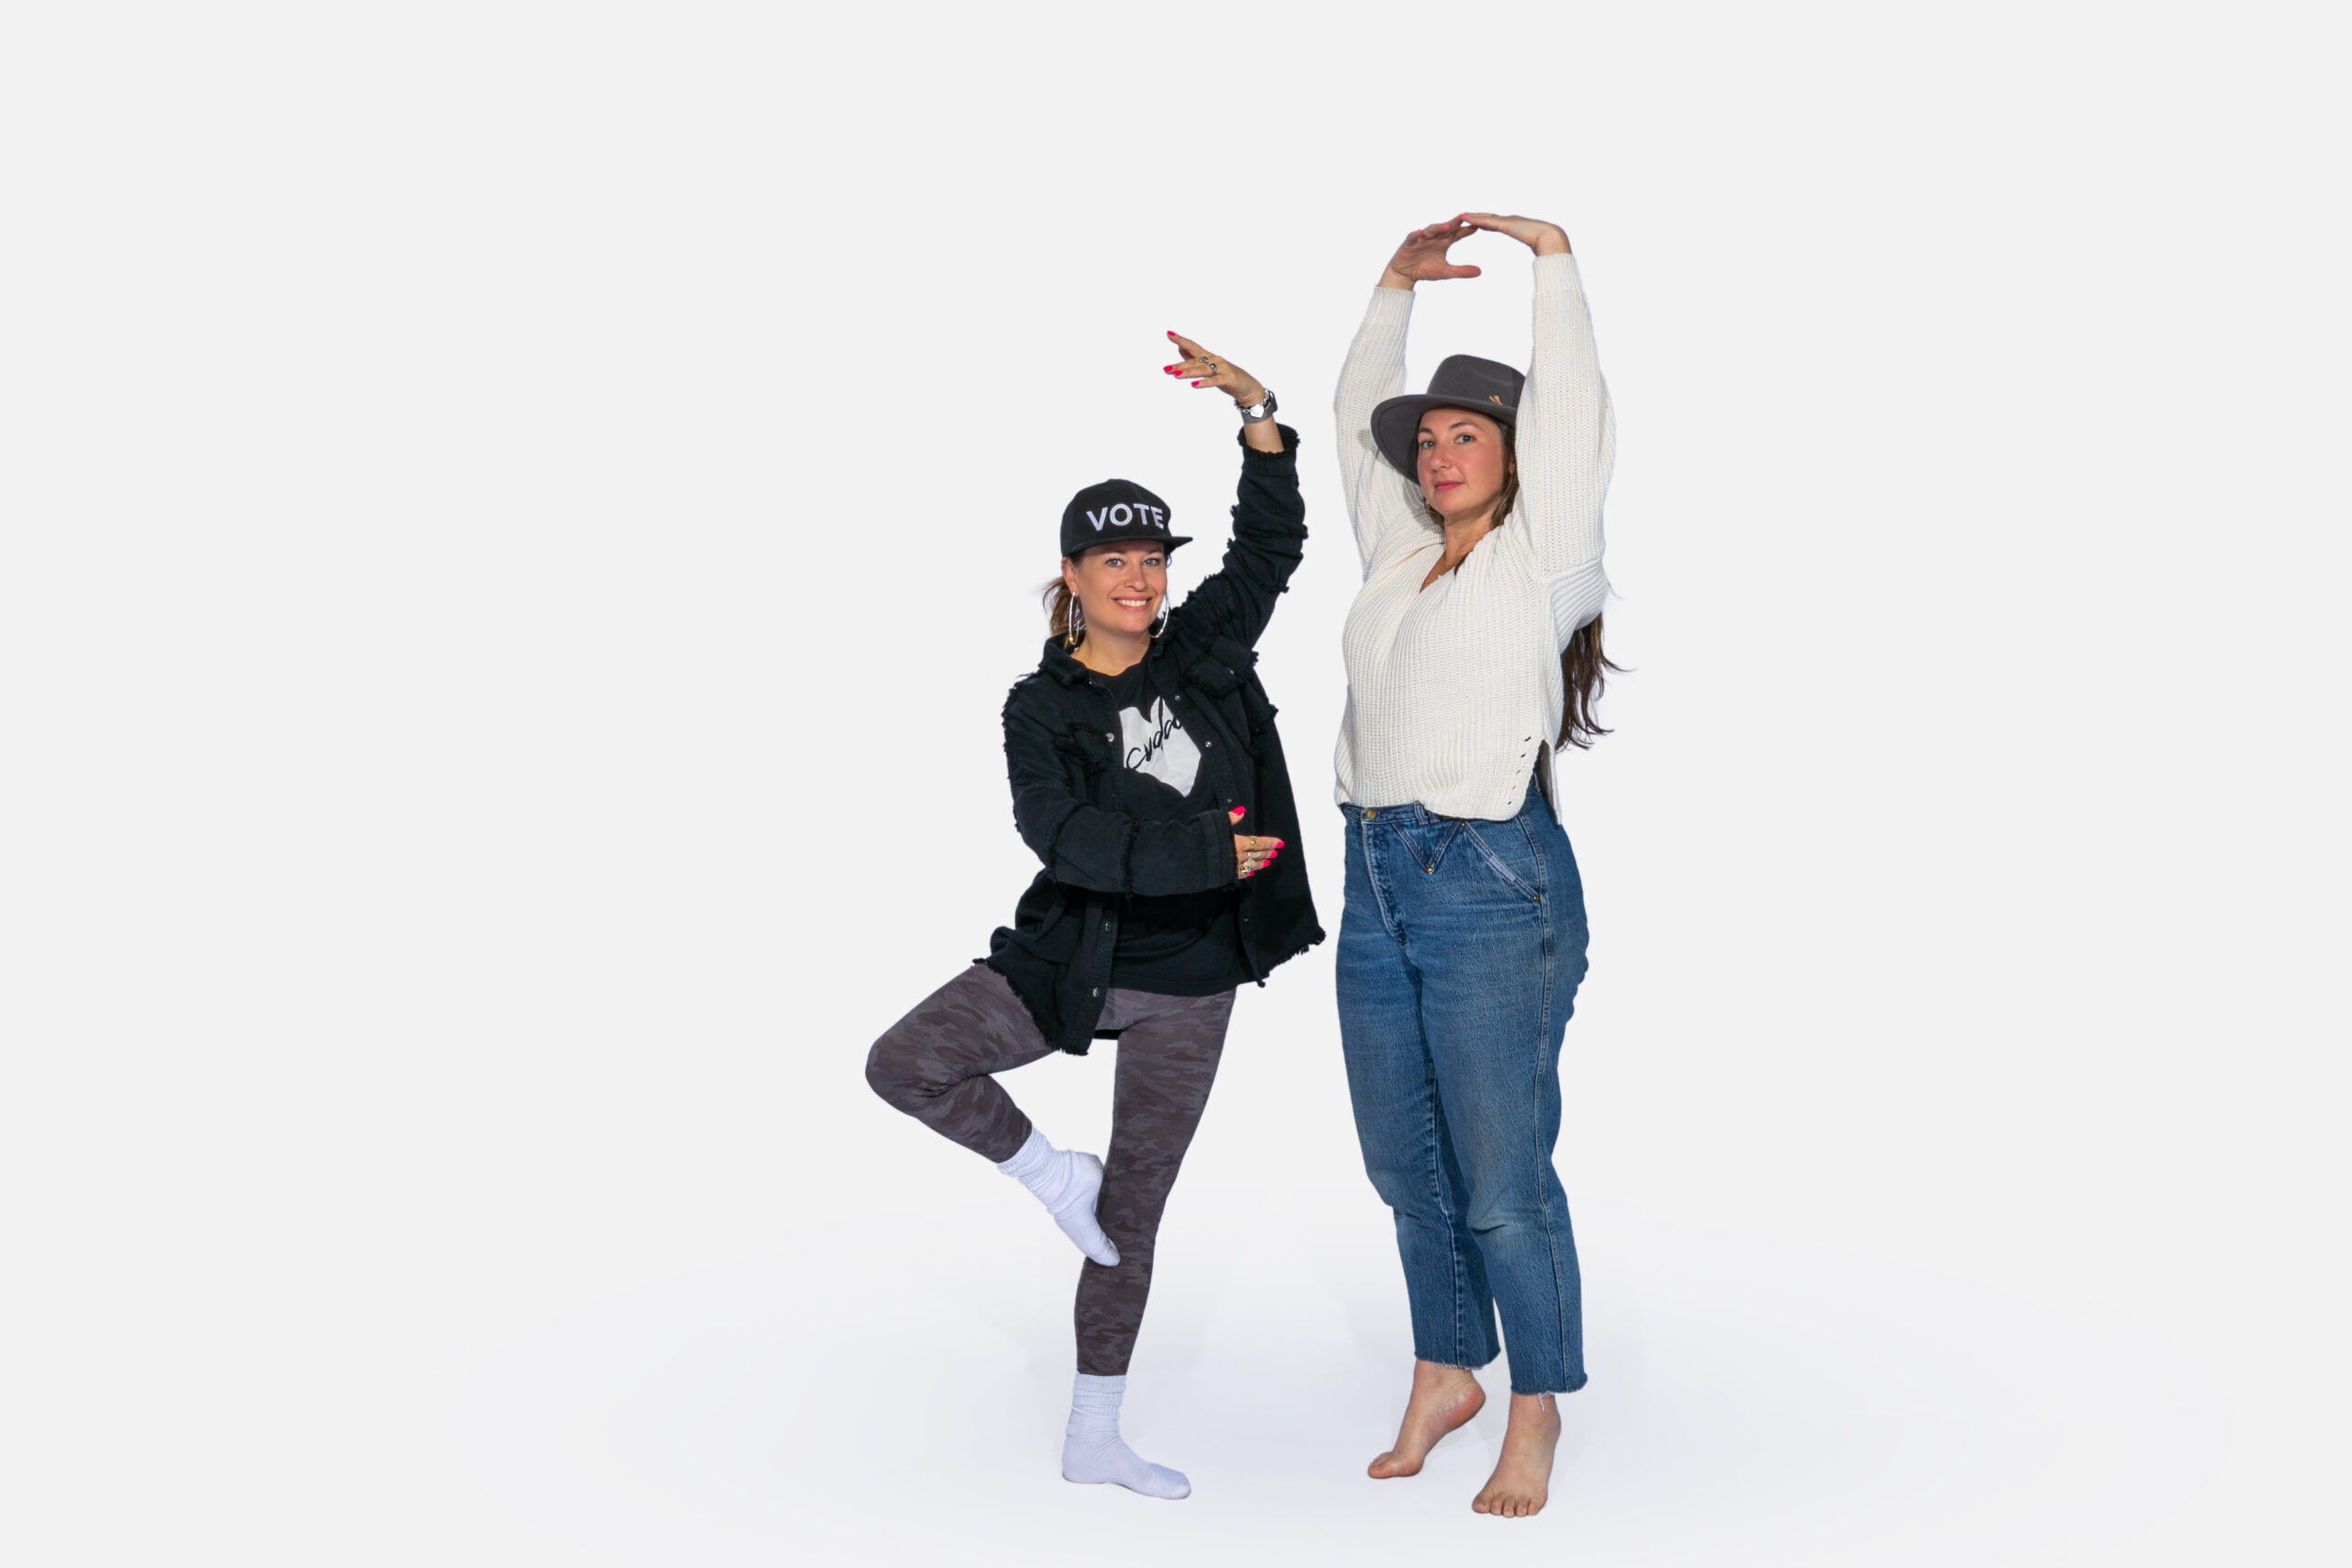 adult dancers in poses in front of a blank white background